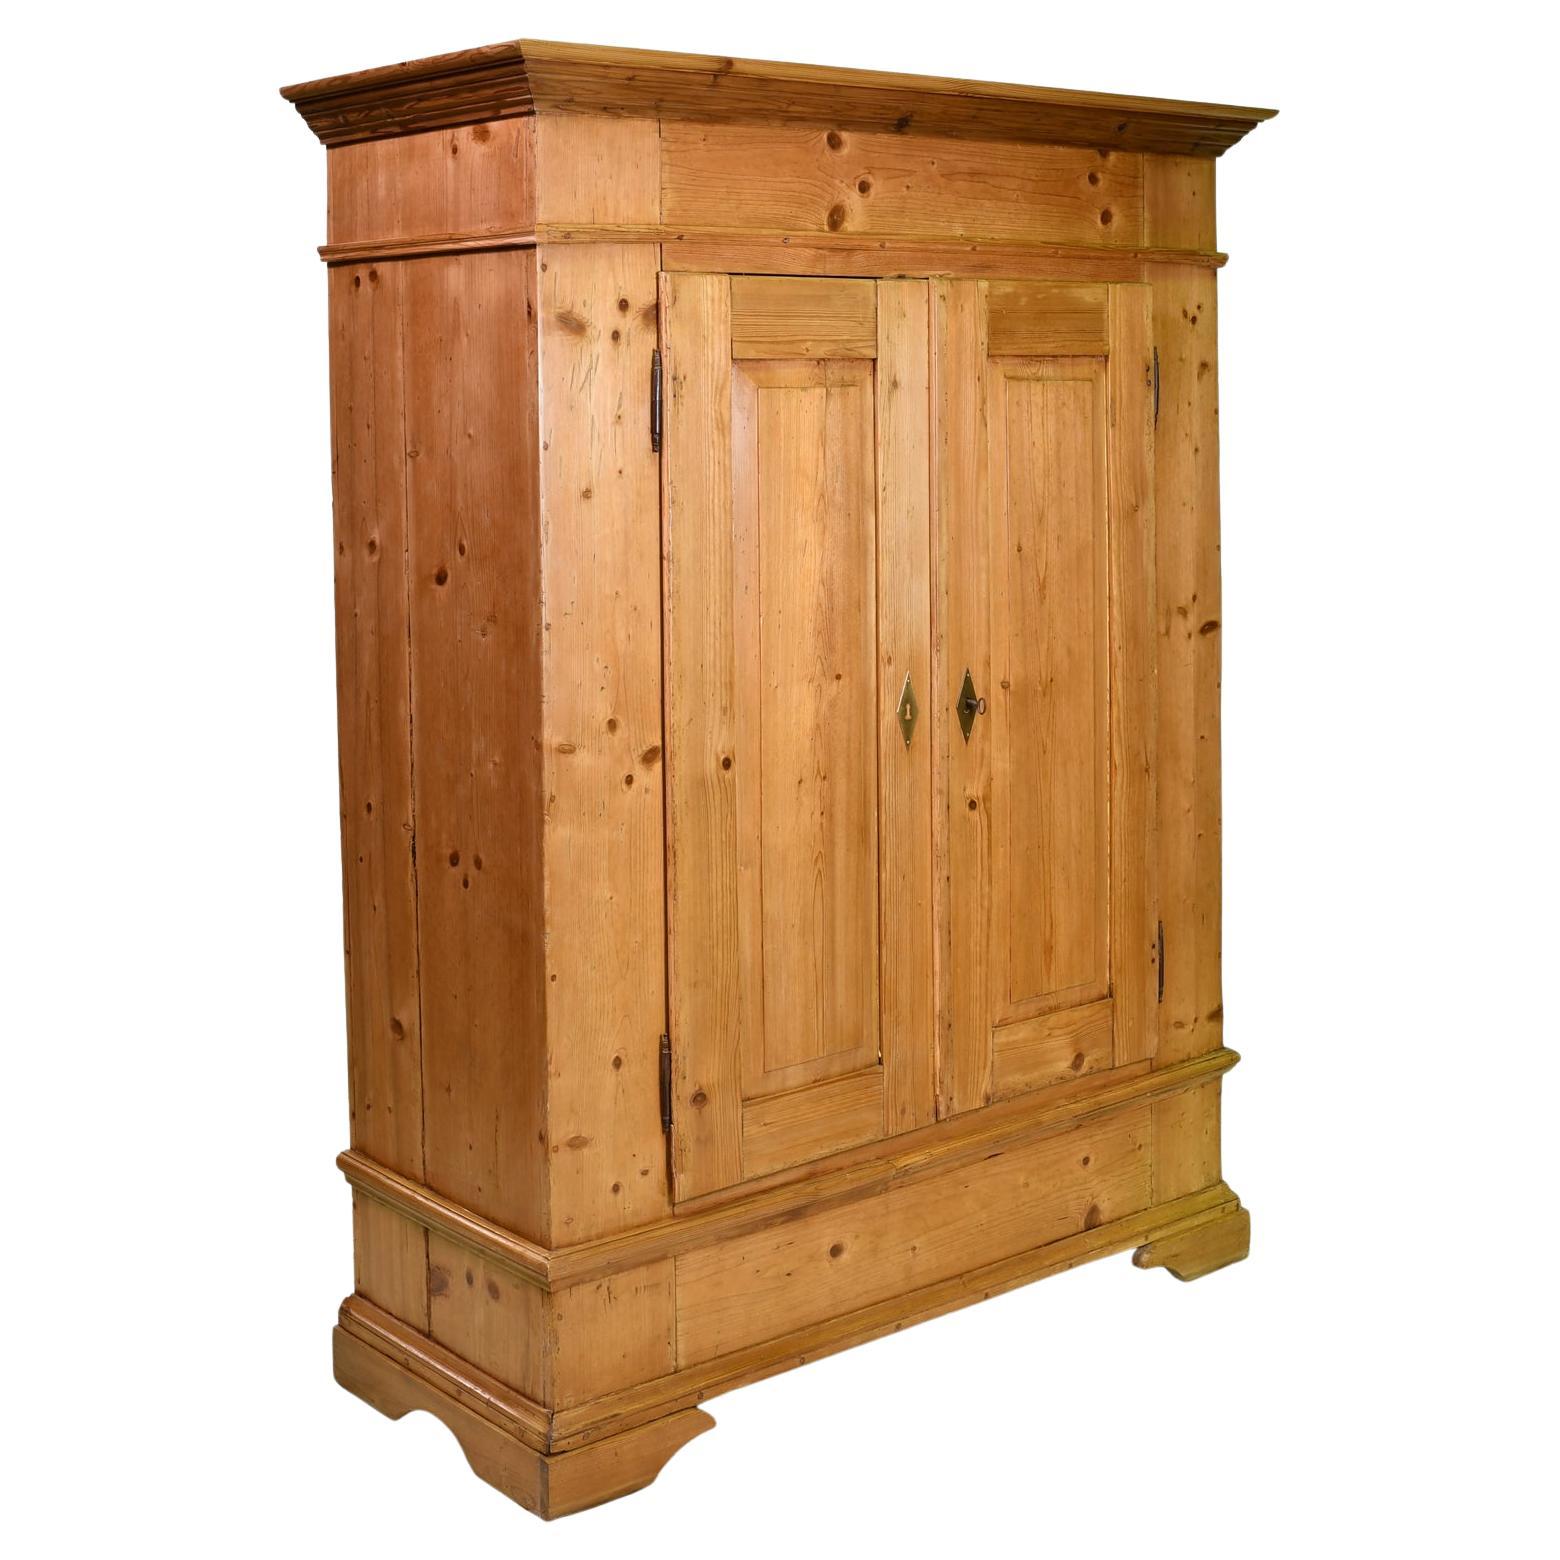 A charming antique European pine armoire with raised panels on the two doors and resting on bracket feet. This country Biedermeier armoire from North Germany was 